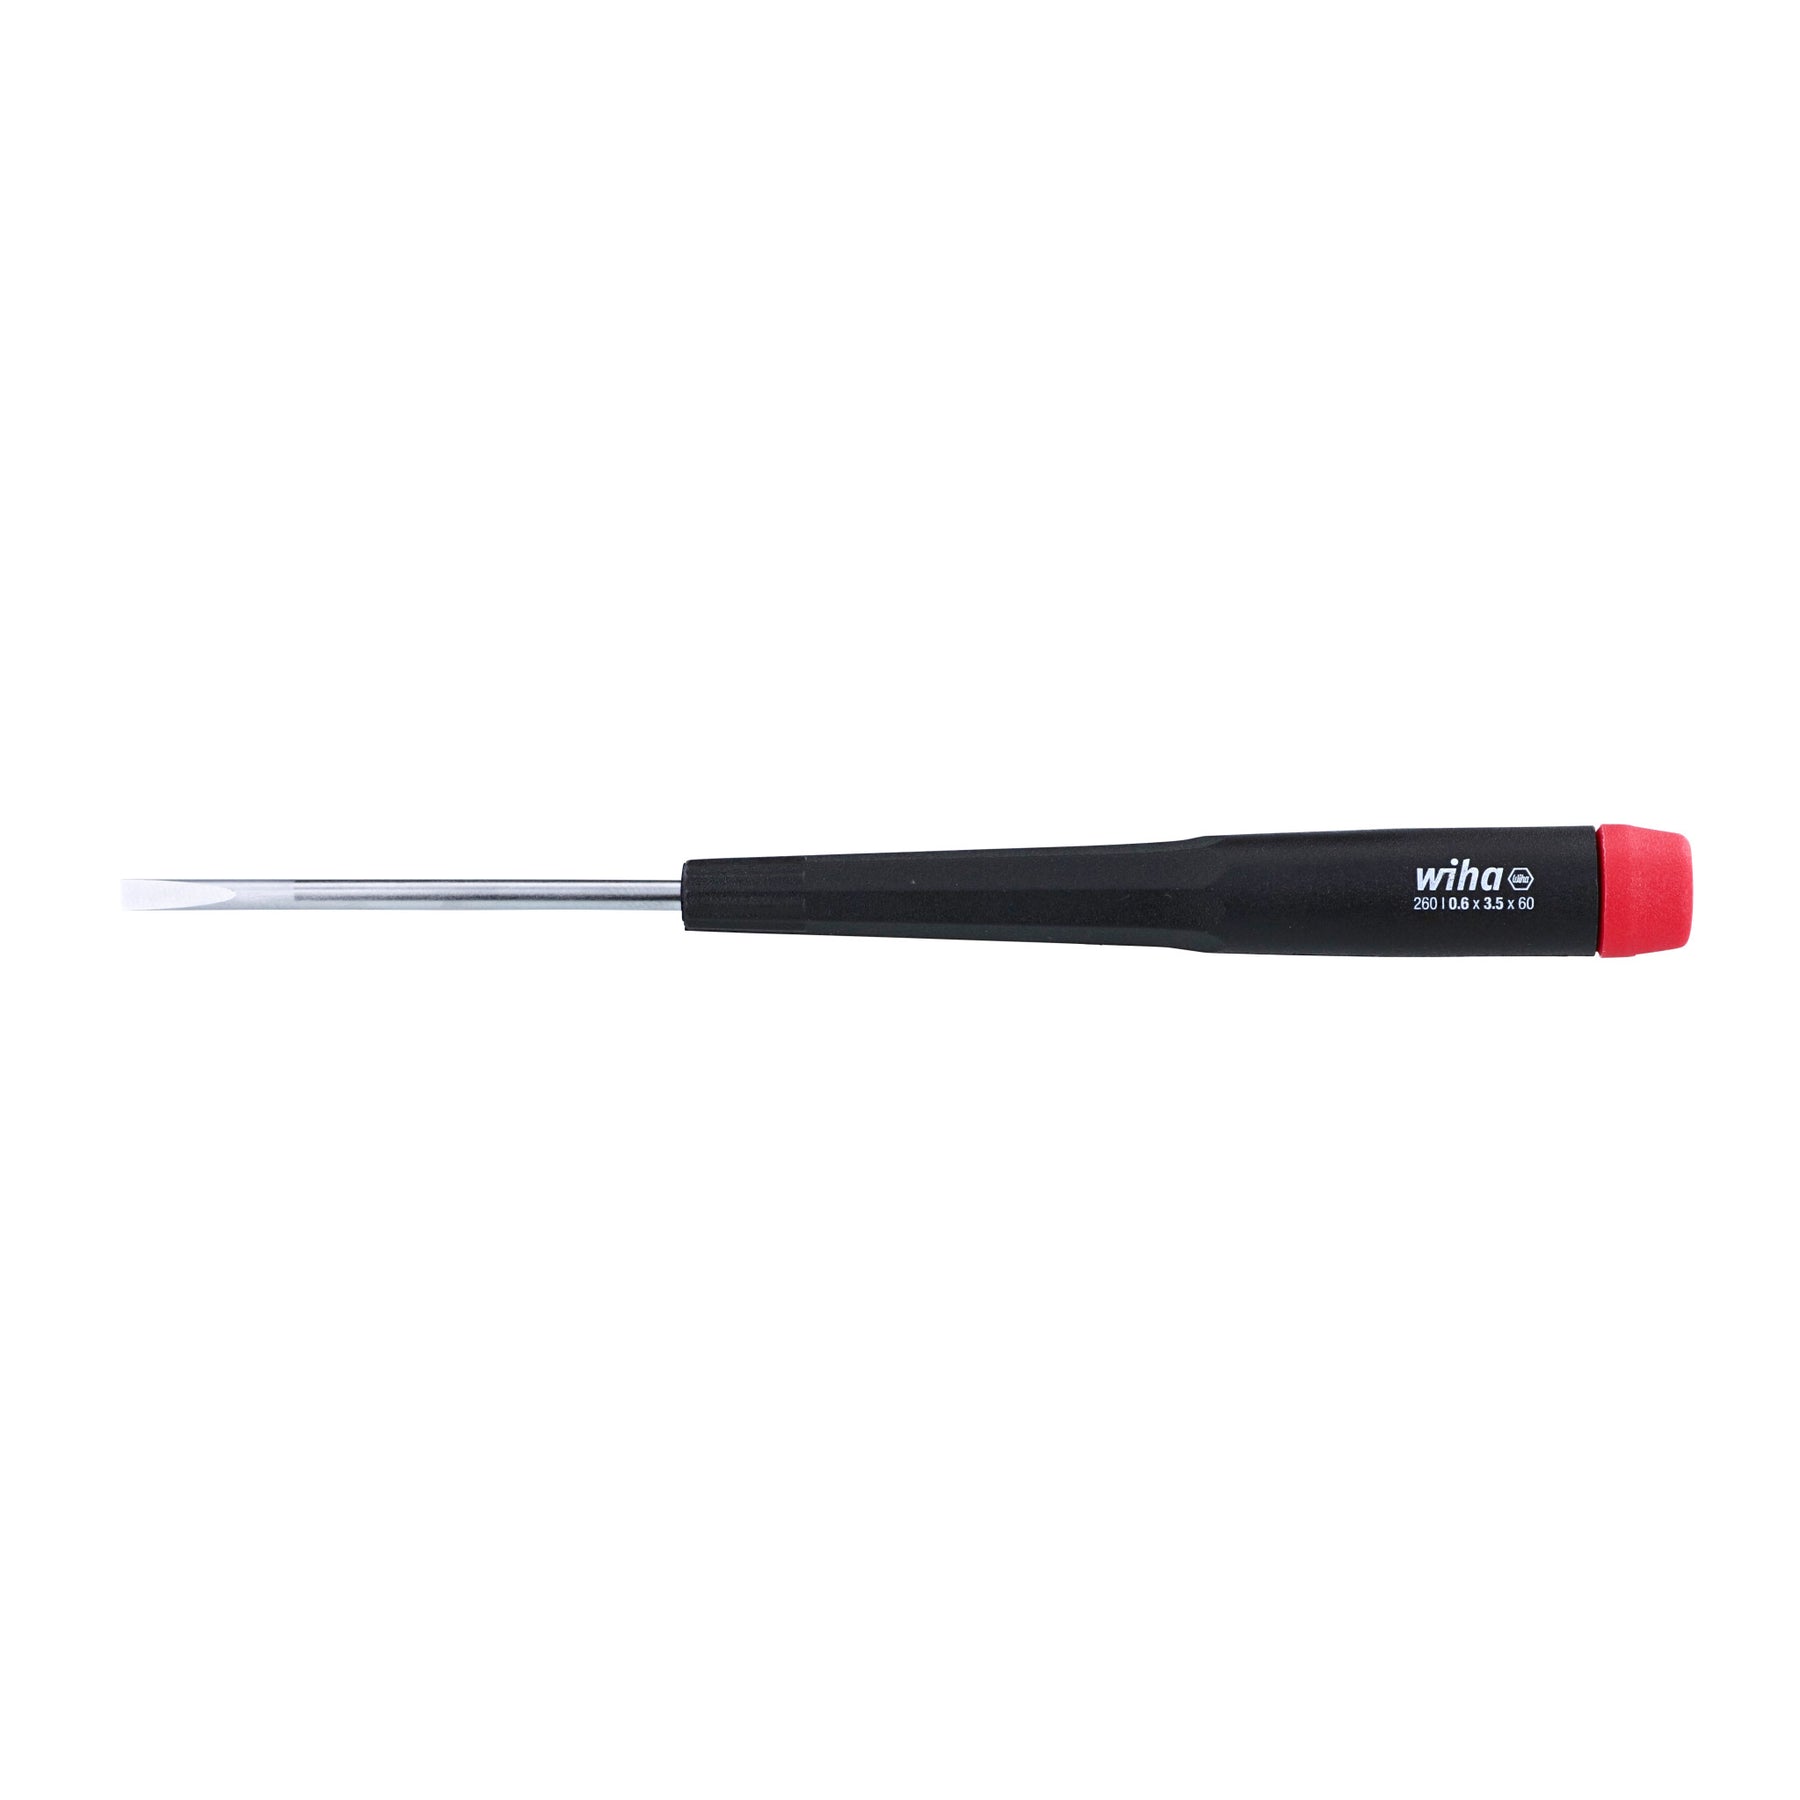 Precision Slotted Screwdriver 3.5mm x 60mm